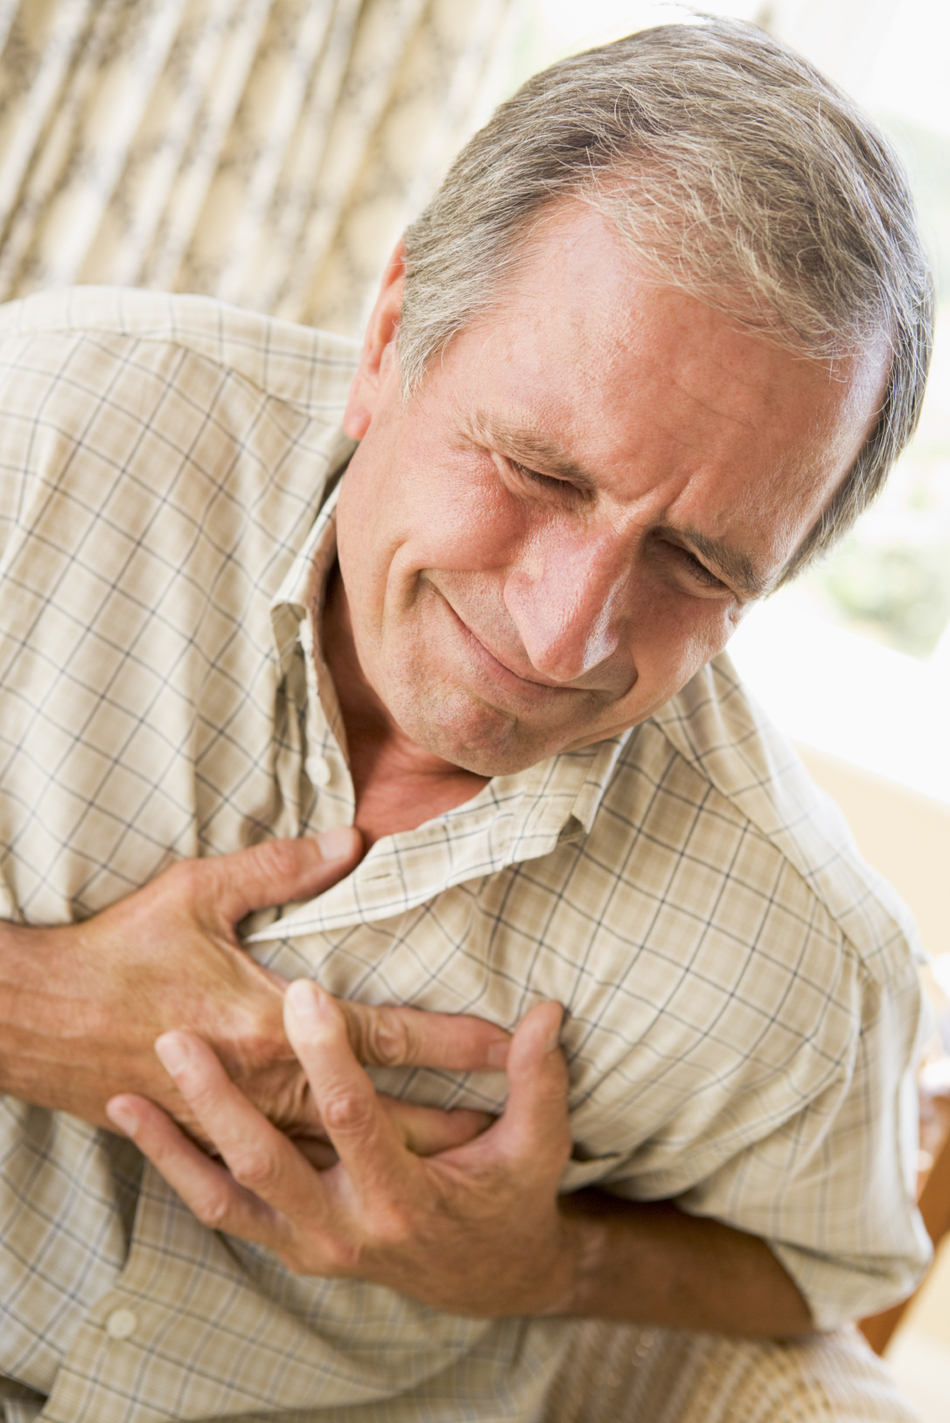 Chest Pain That Isn’t Caused by a Heart Attack